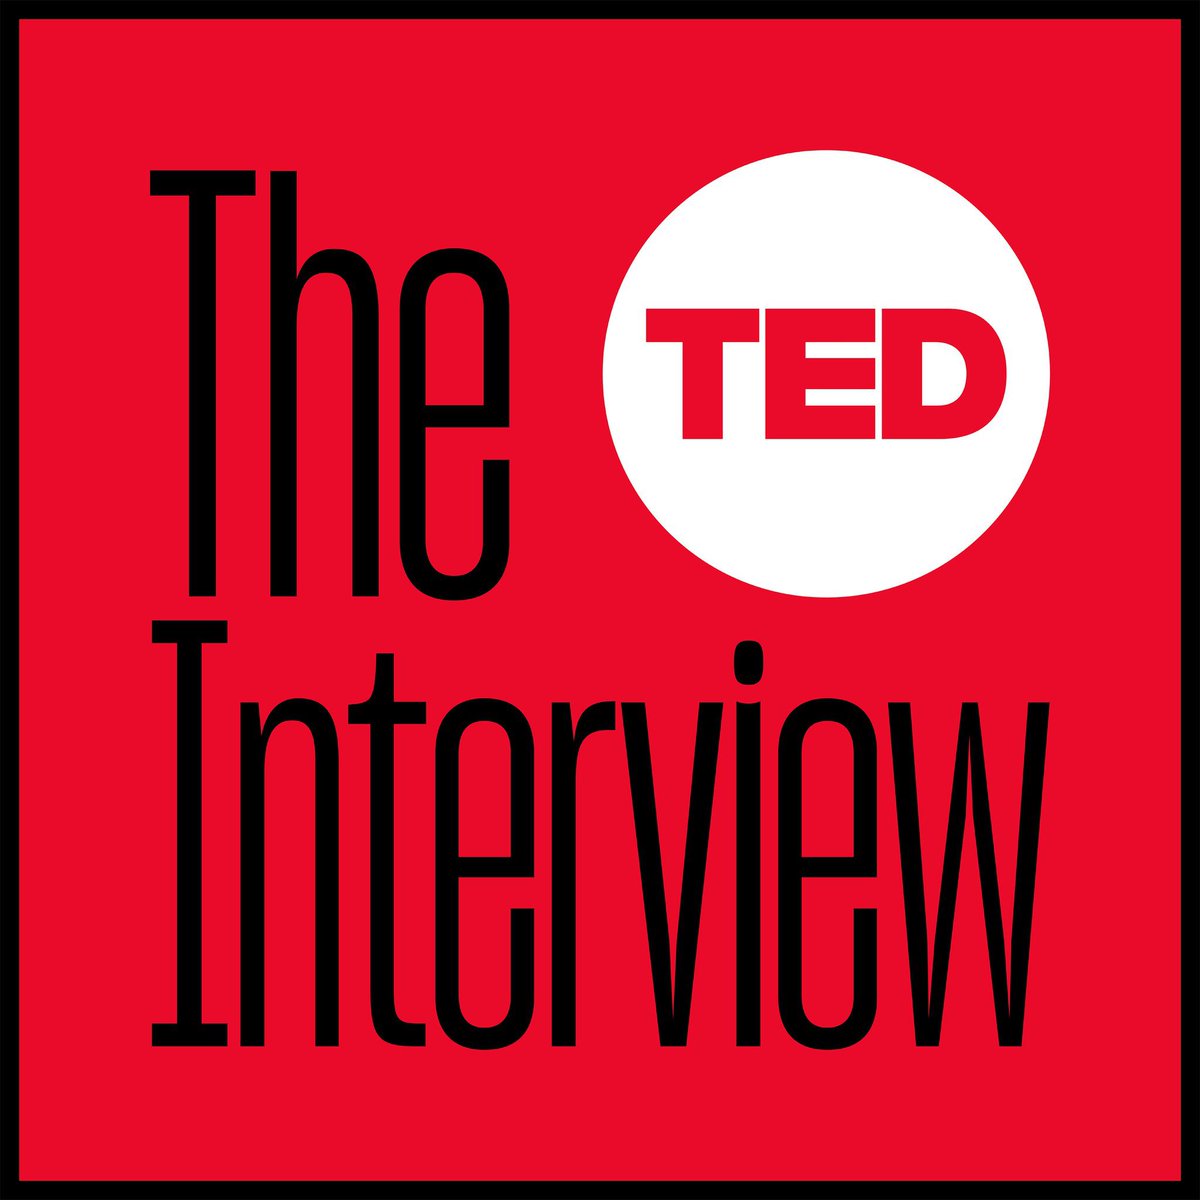 Because of the way that human beings have biologically evolved, @PaulBloomatYale says that we can sometimes struggle to lead with empathy. Check out his full conversation with @TEDChris on the latest episode of The TED Interview: t.ted.com/kl35b01